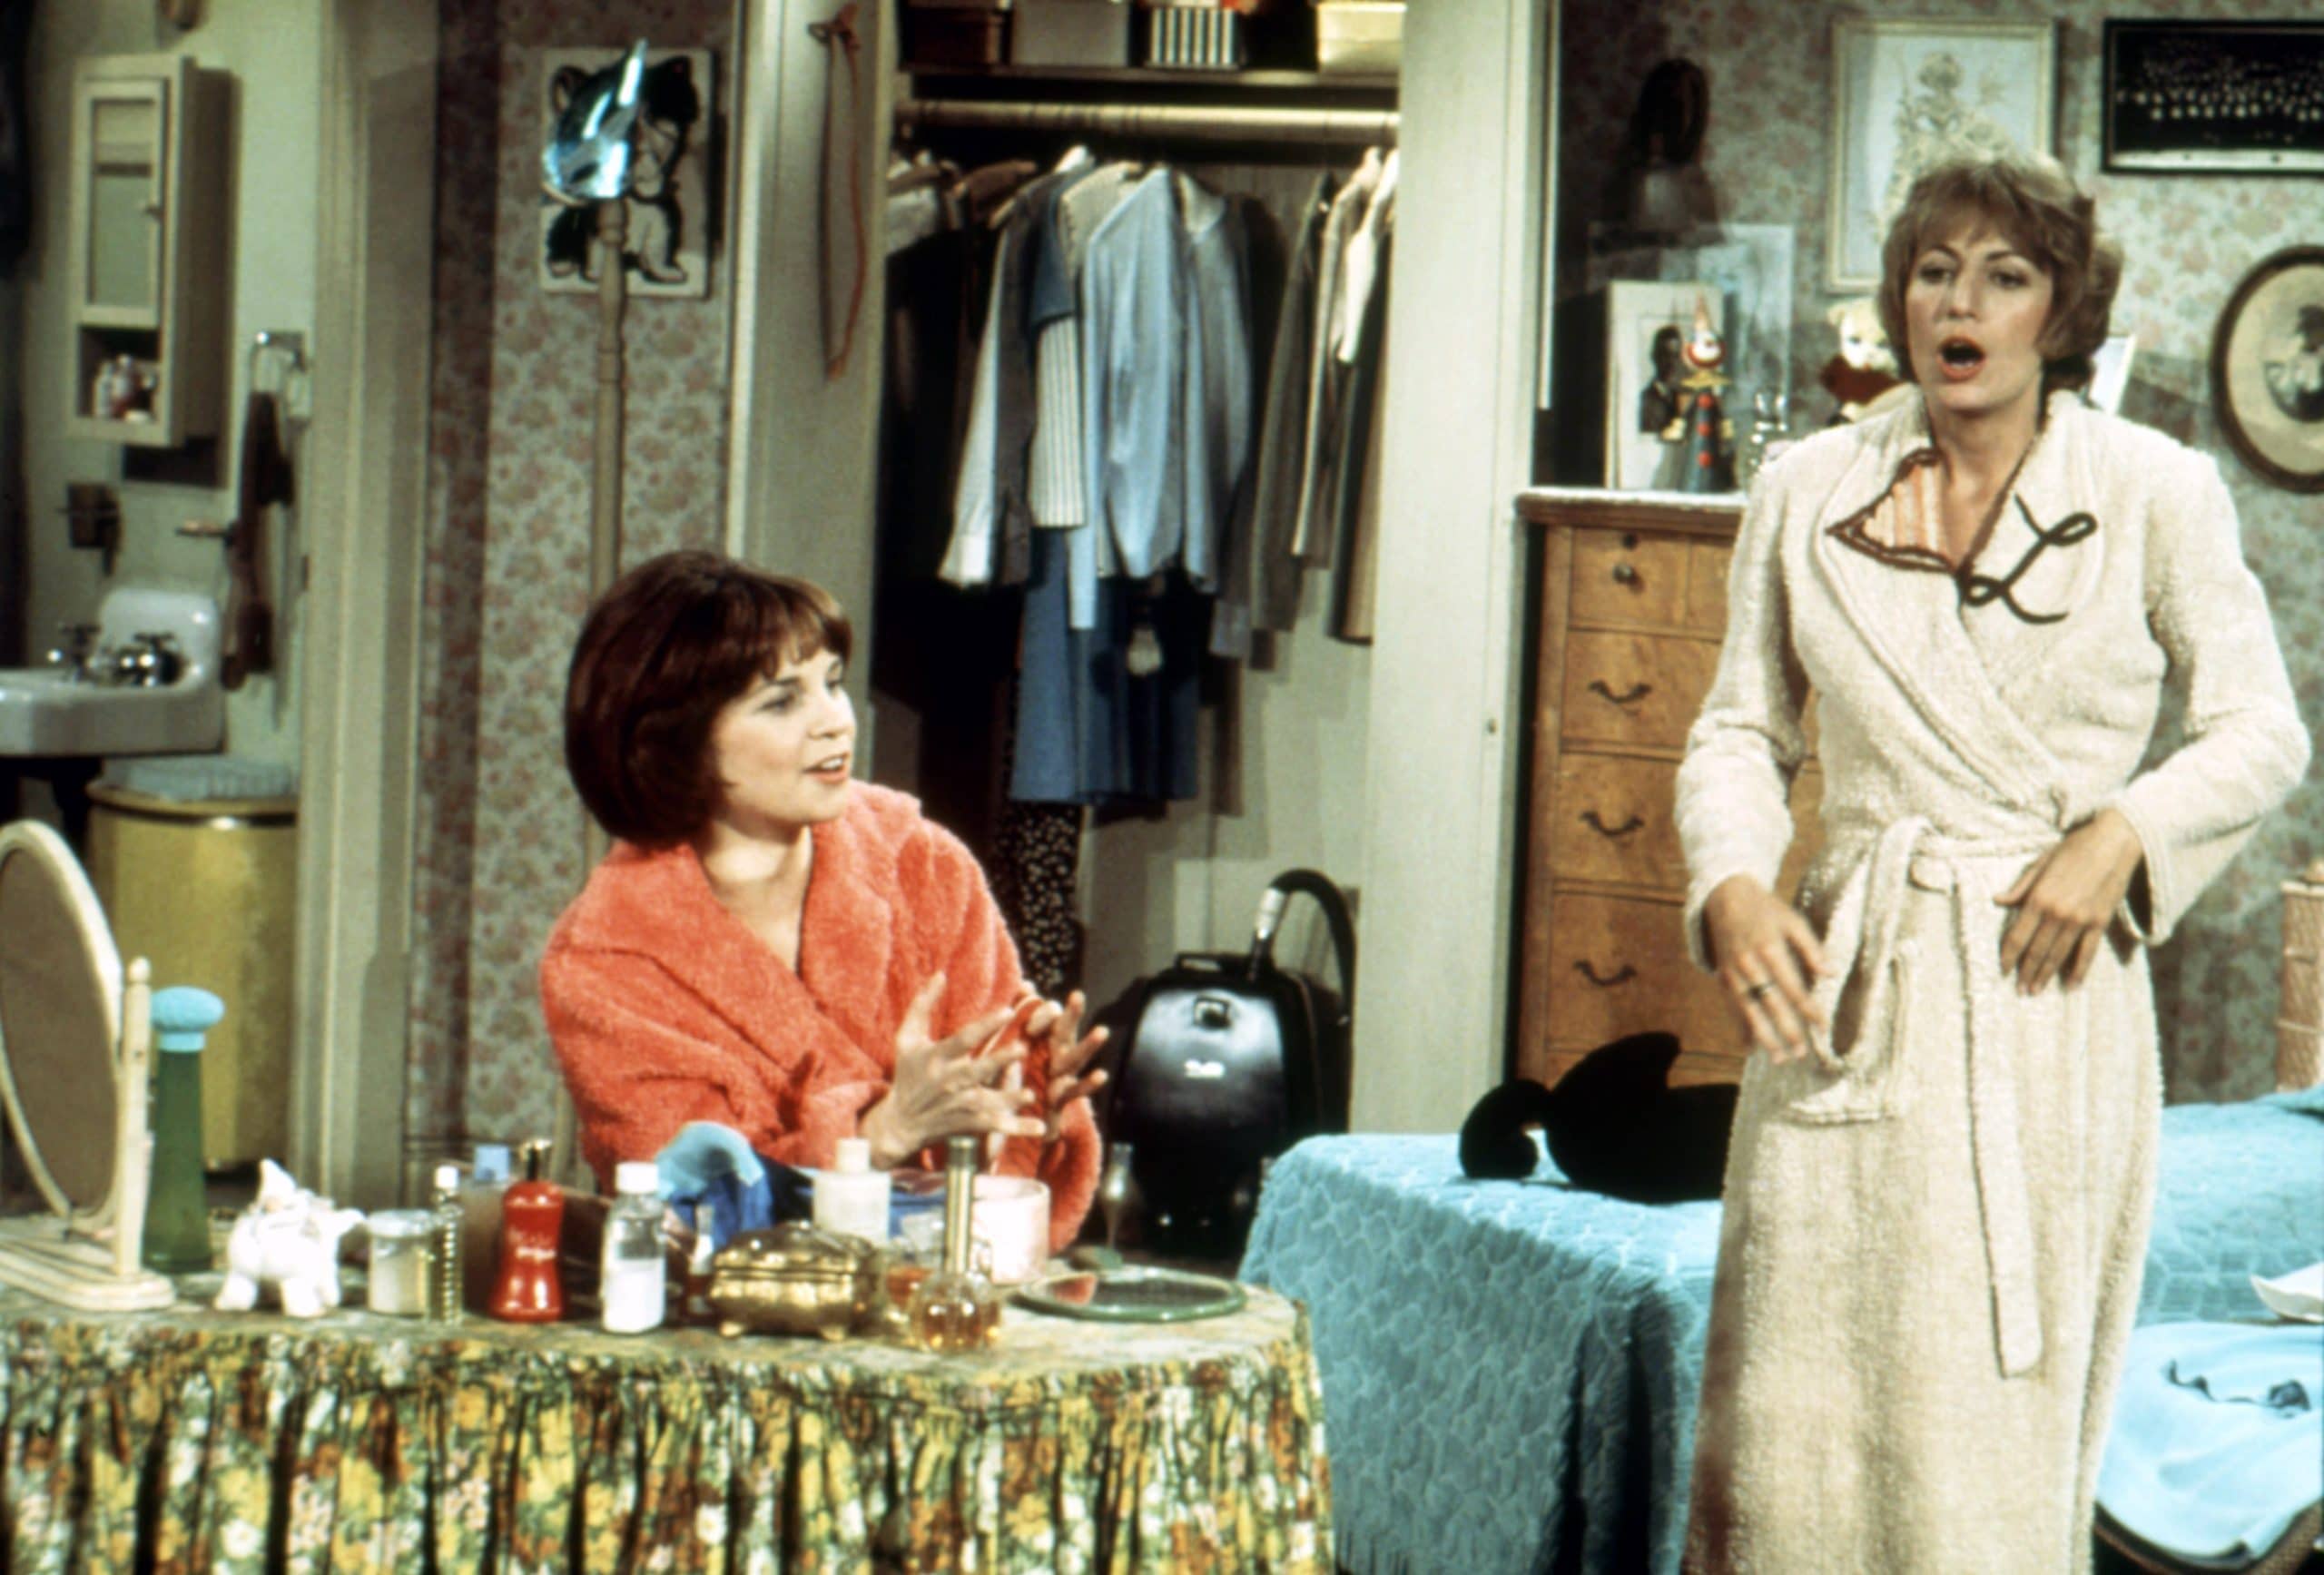 LAVERNE AND SHIRLEY, from left: Cindy Williams, Penny Marshall, 1976-83